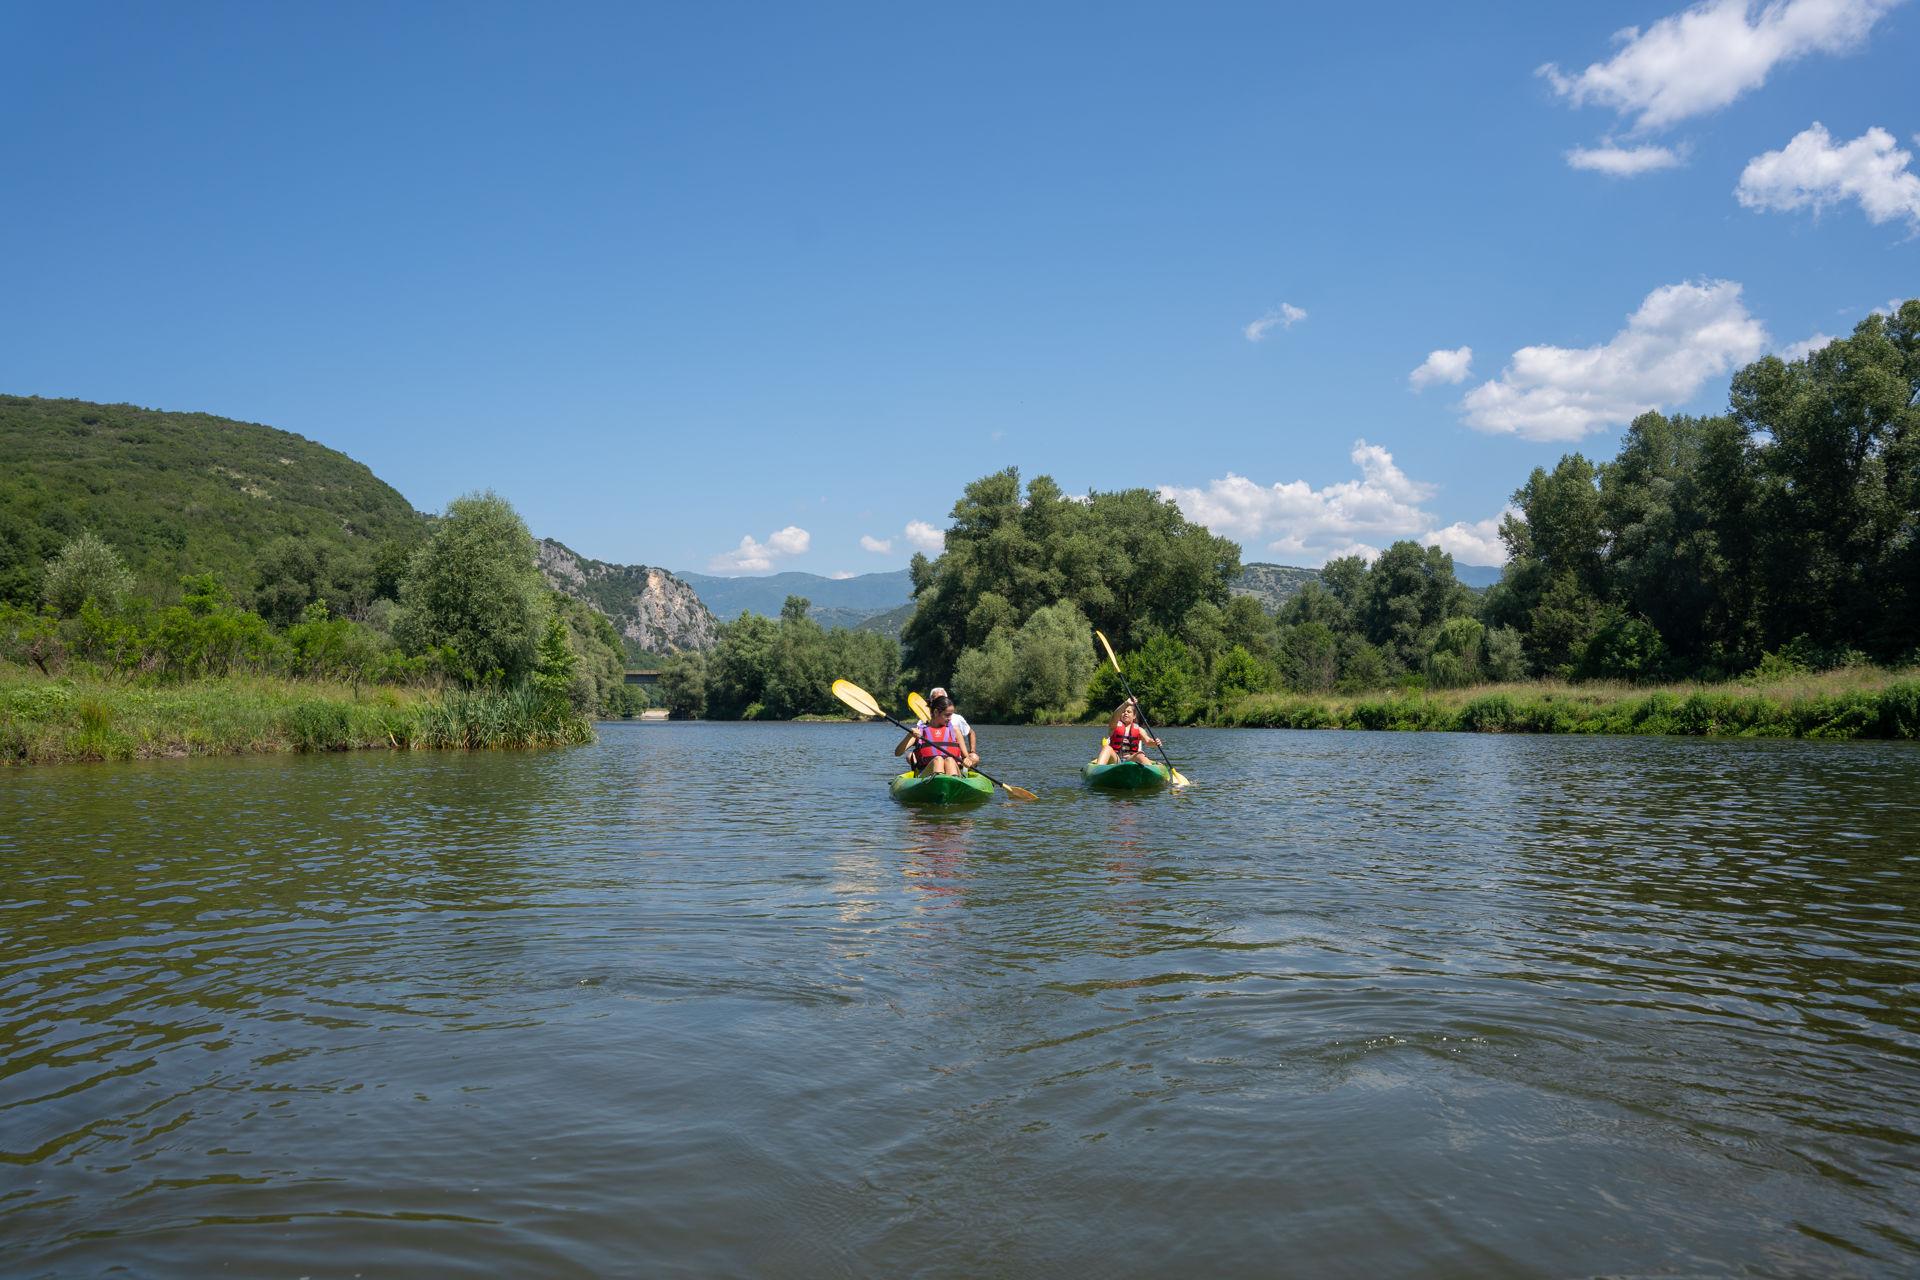 There are many canoeing routes offered as organised excursions